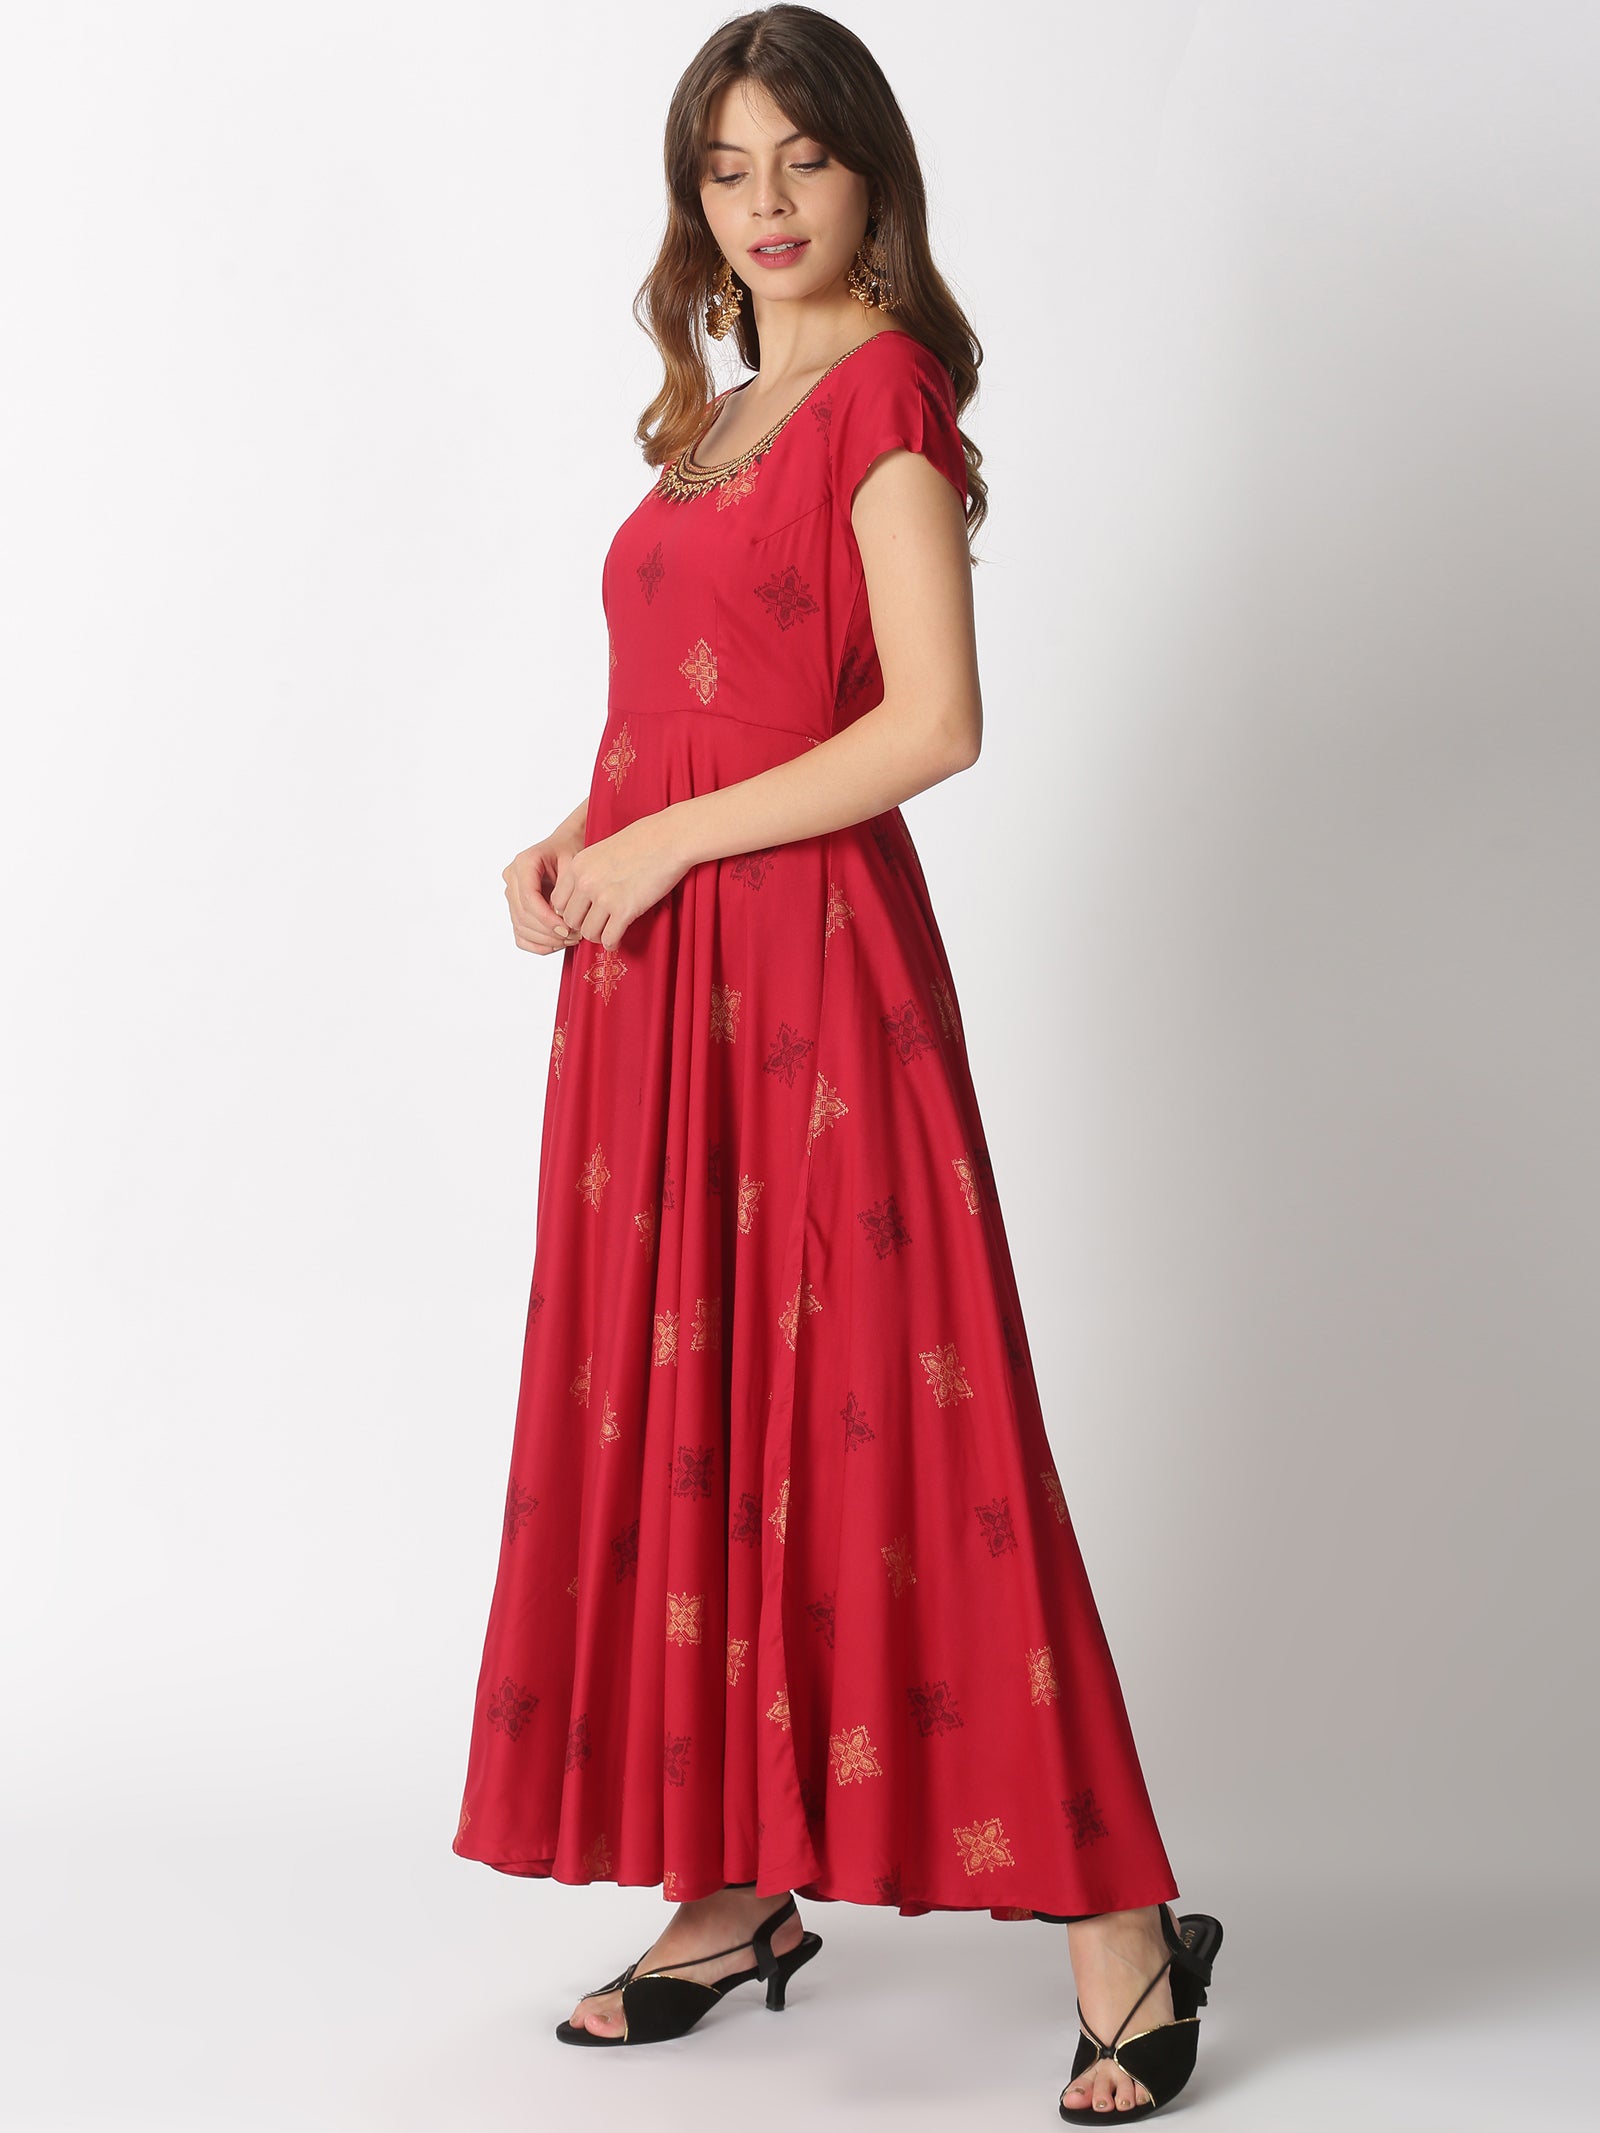 Red Ethnic Motifs Printed Anarkali Kurta with Embroidered Neck